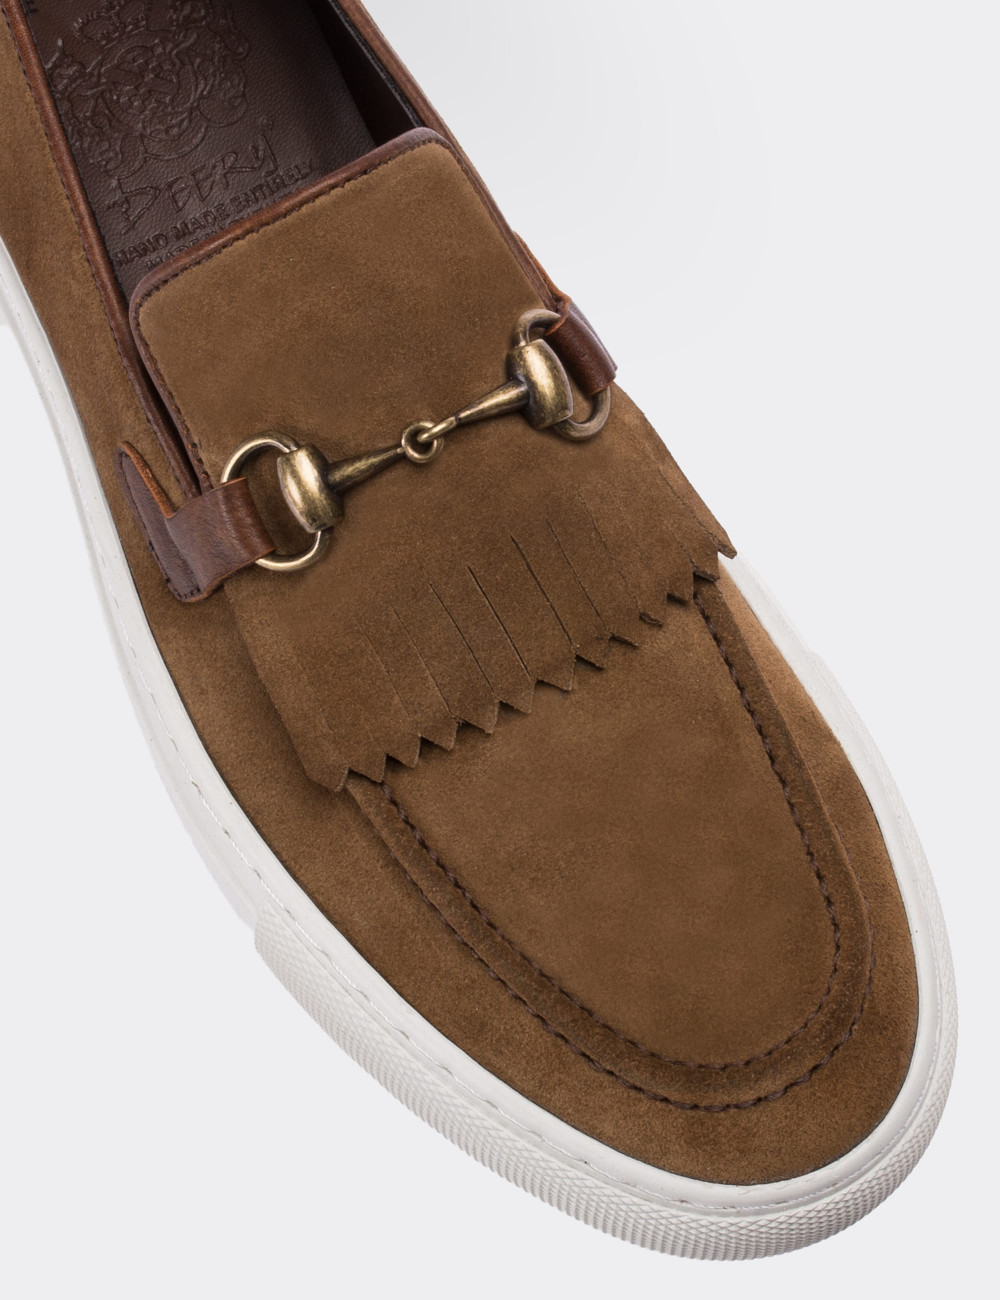 Tan Suede Leather Loafers - 01739MTBAC01